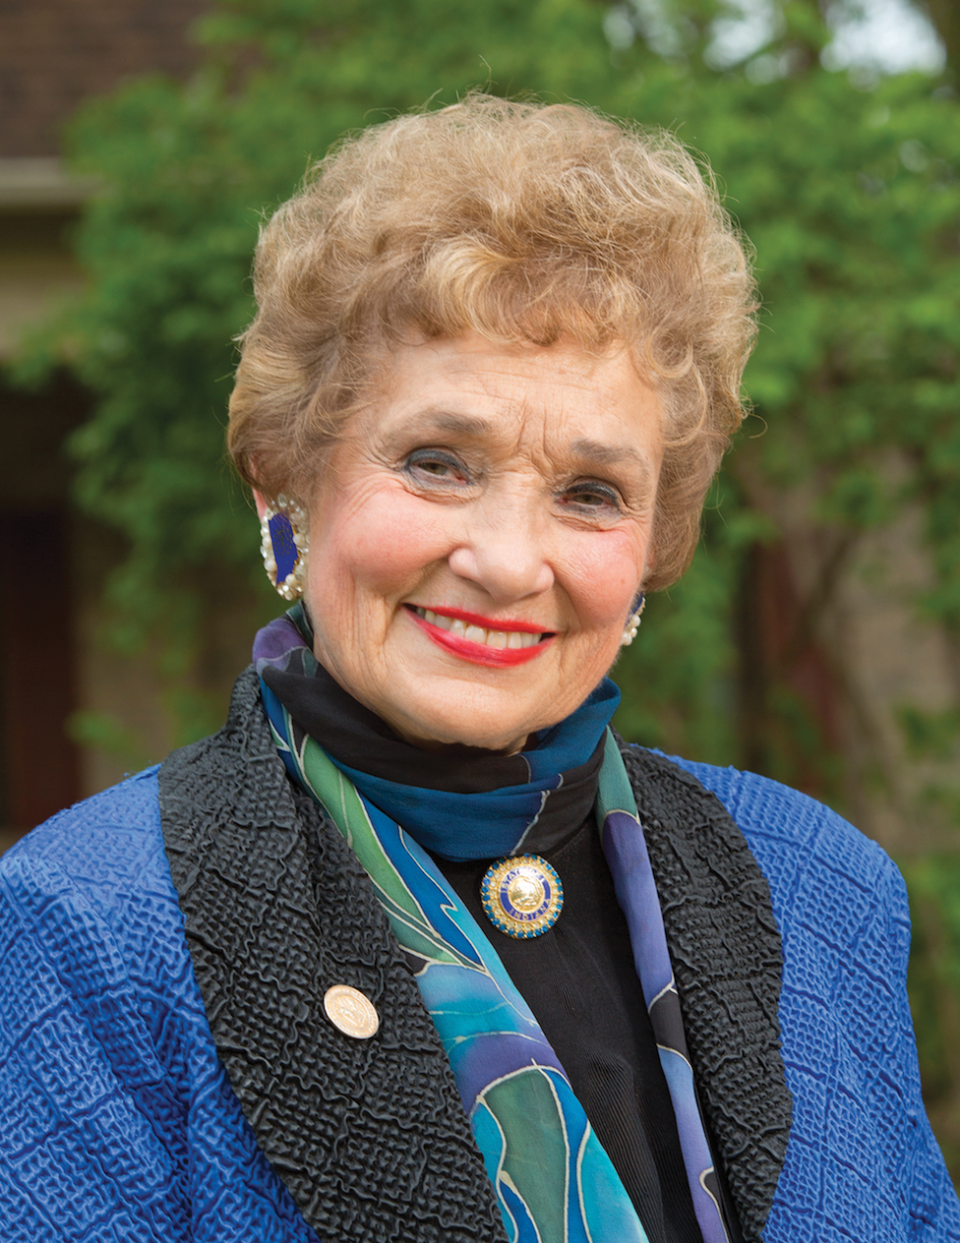 State Rep. Sheila Klinker was first elected to the Indiana House of Representatives in 1982 to represent Indiana House District 27, serving  Lafayette.
(Credit: Indiana House of Representatives)